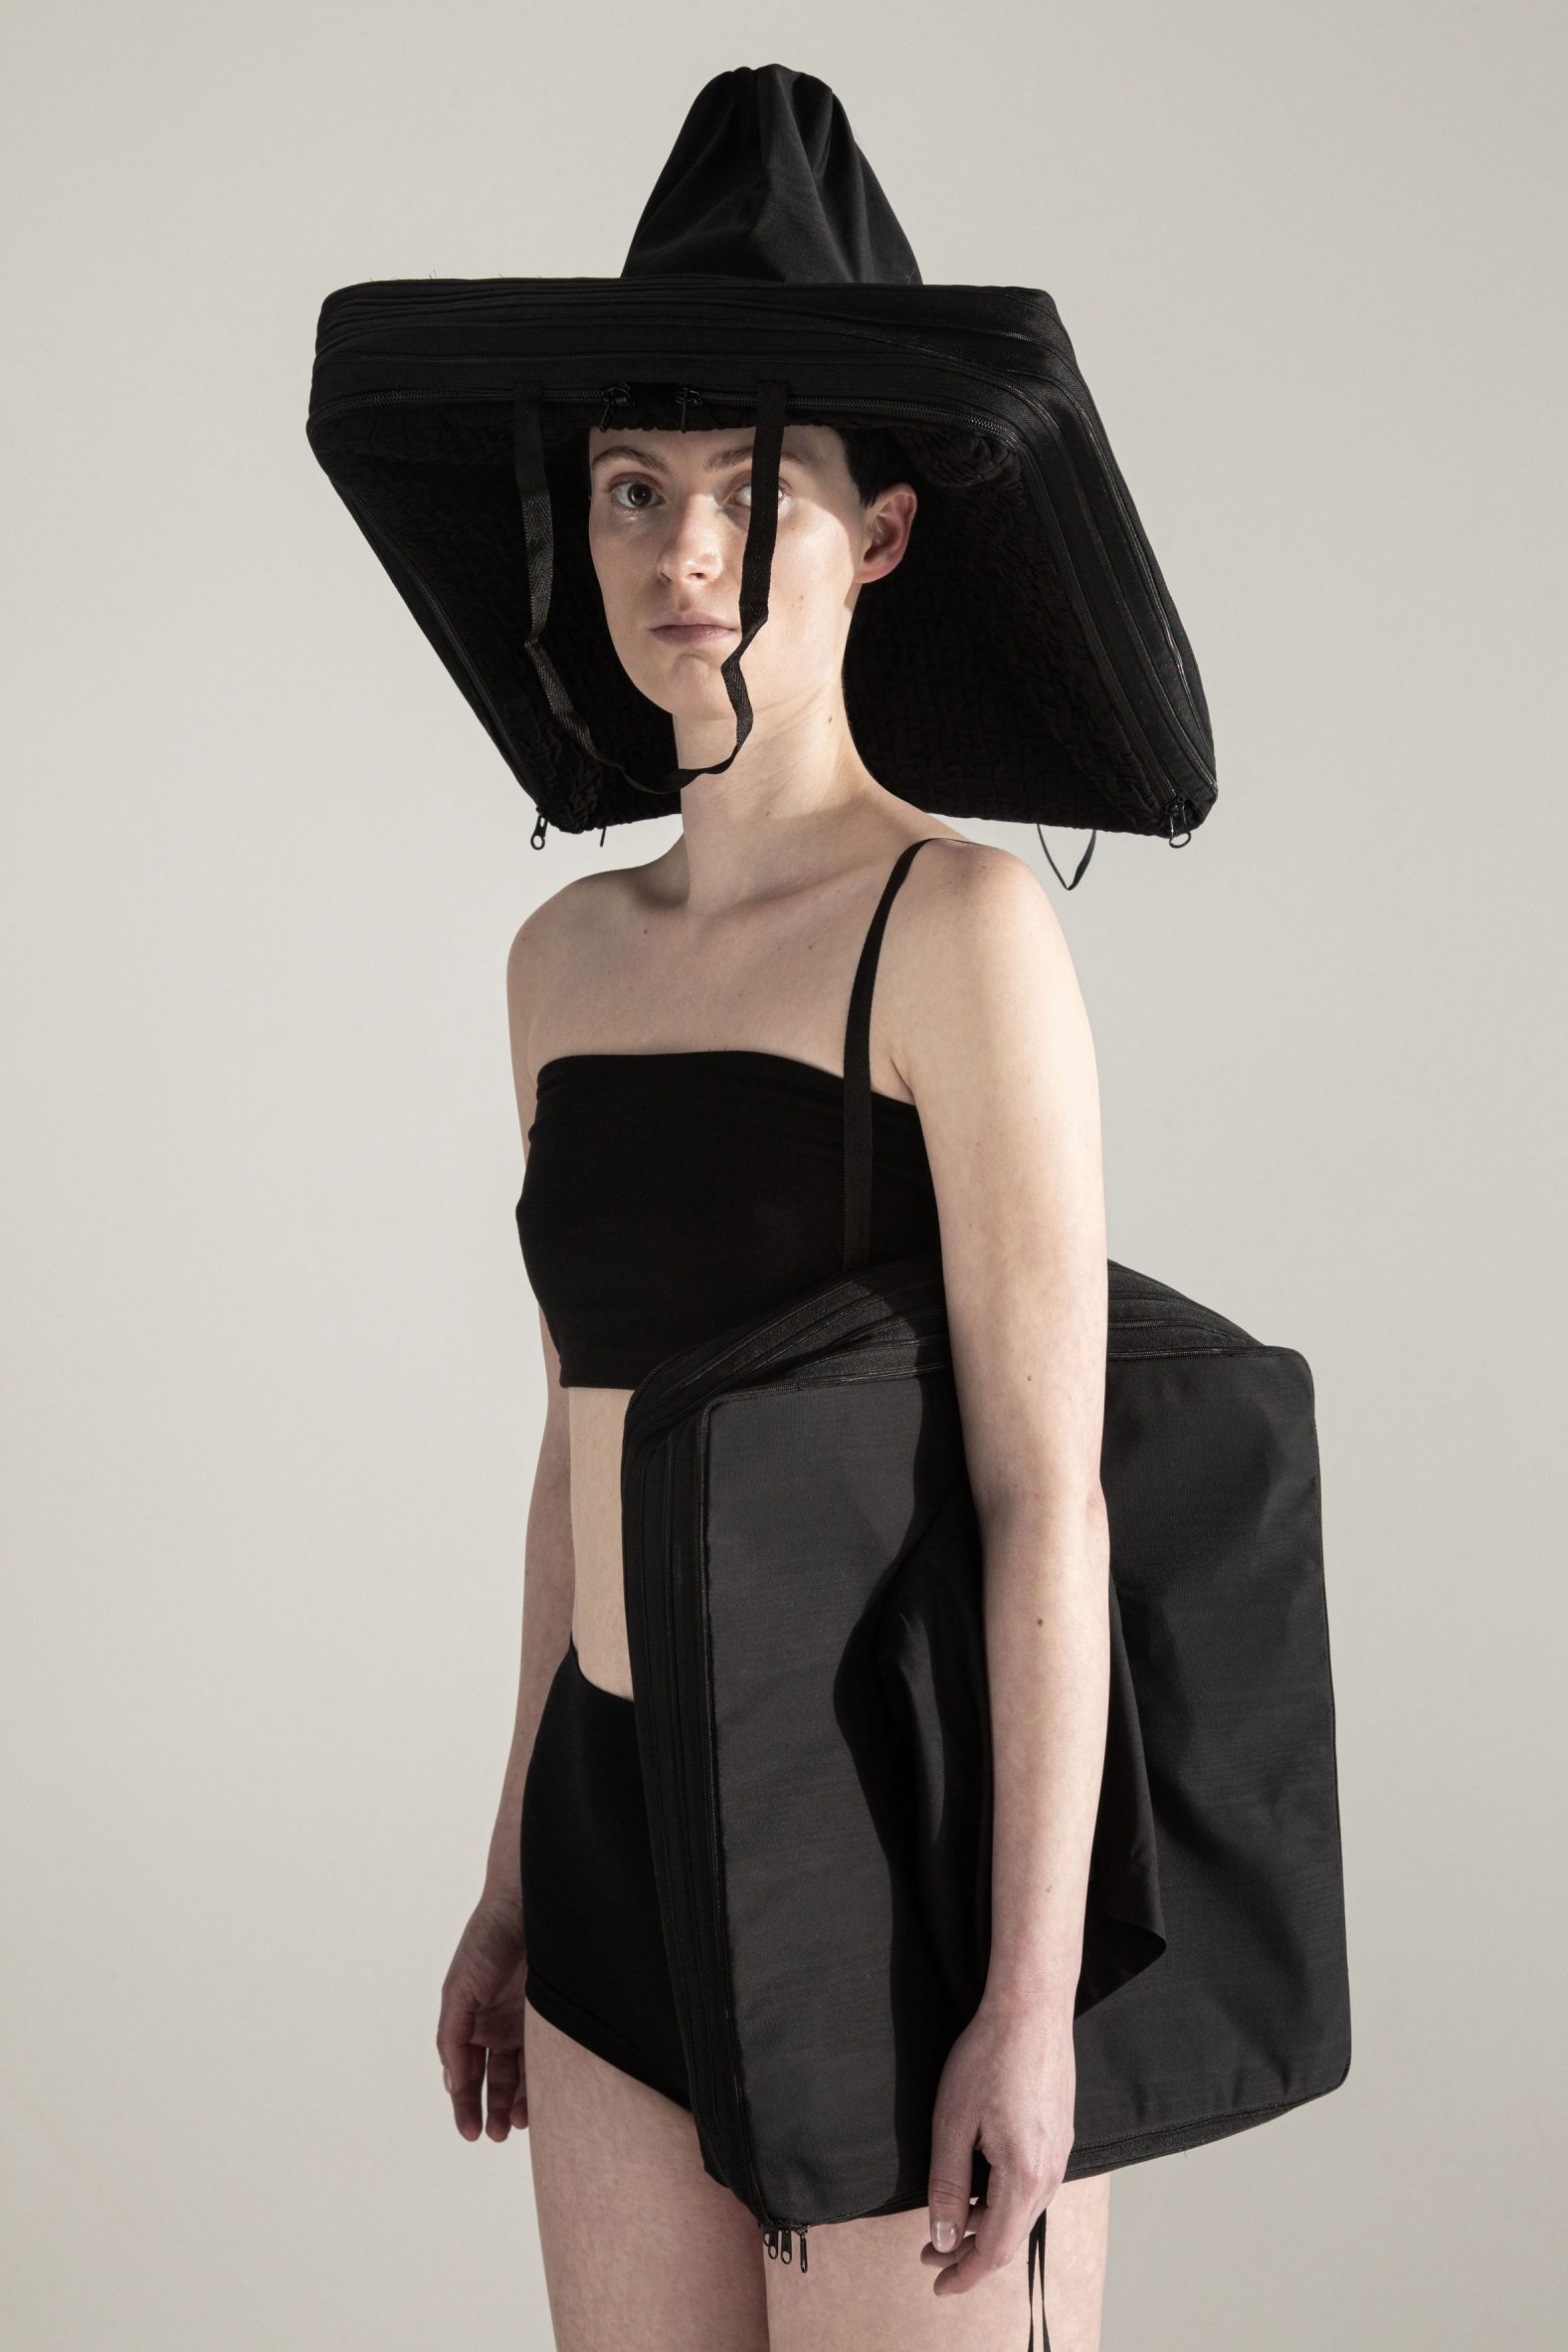 Black hat with zipped elements and a black matching outfit